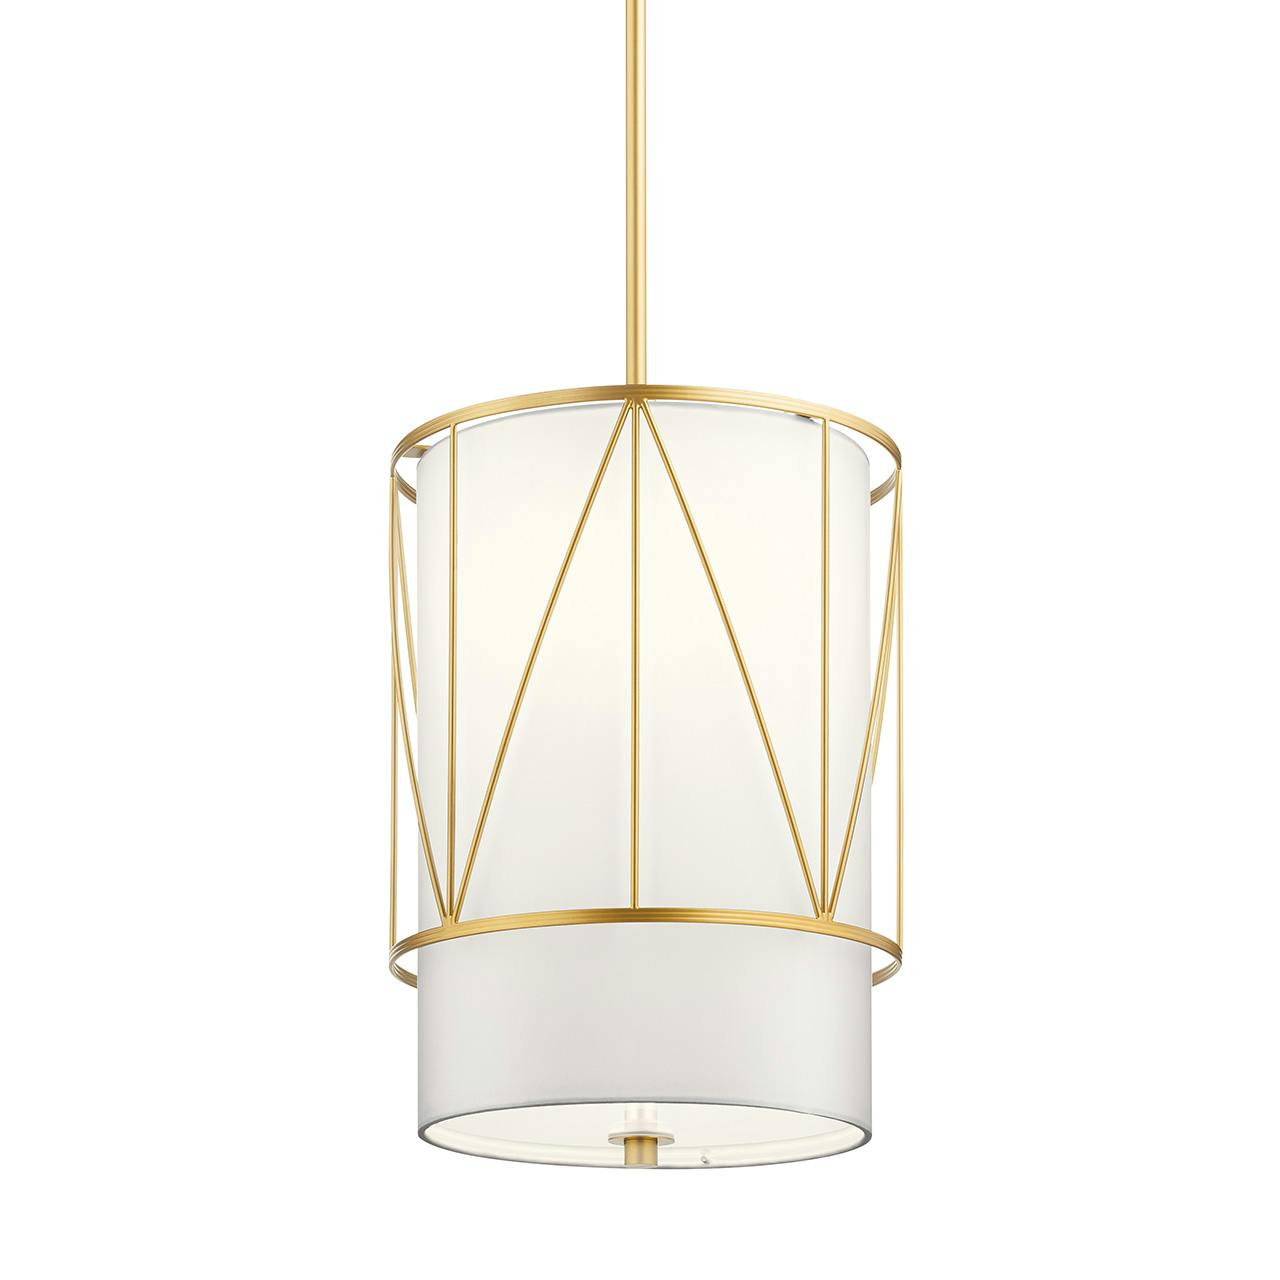 Birkleigh™ 18.25" Pendant Classic Gold without the canopy on a white background